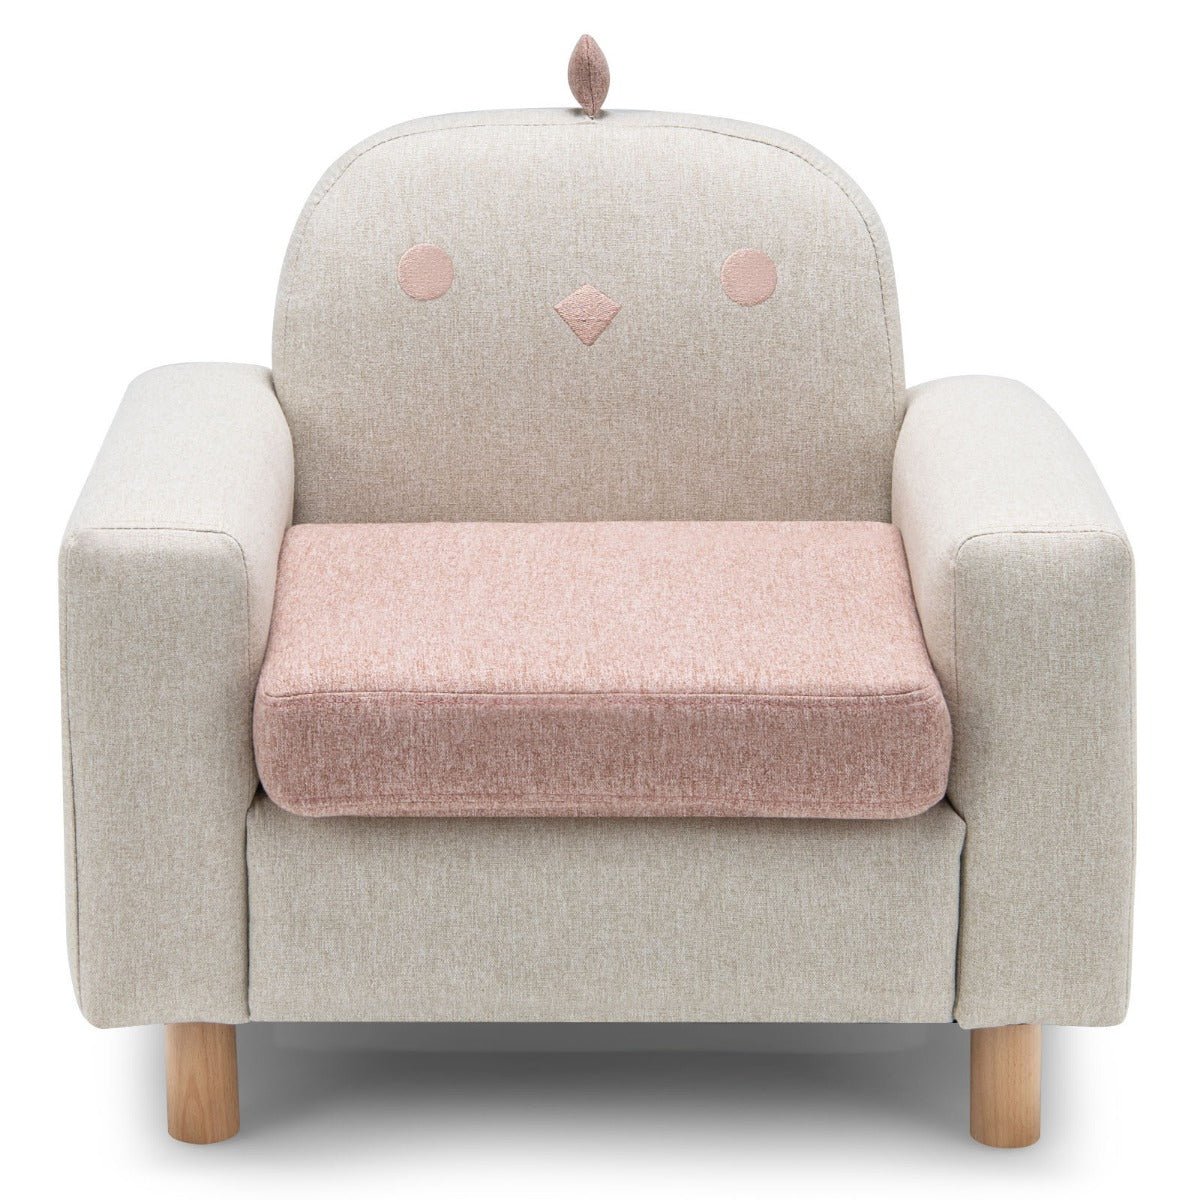 Cozy Kids Sofa Wooden Armrest Chair with Thick Cushion and Beech Legs